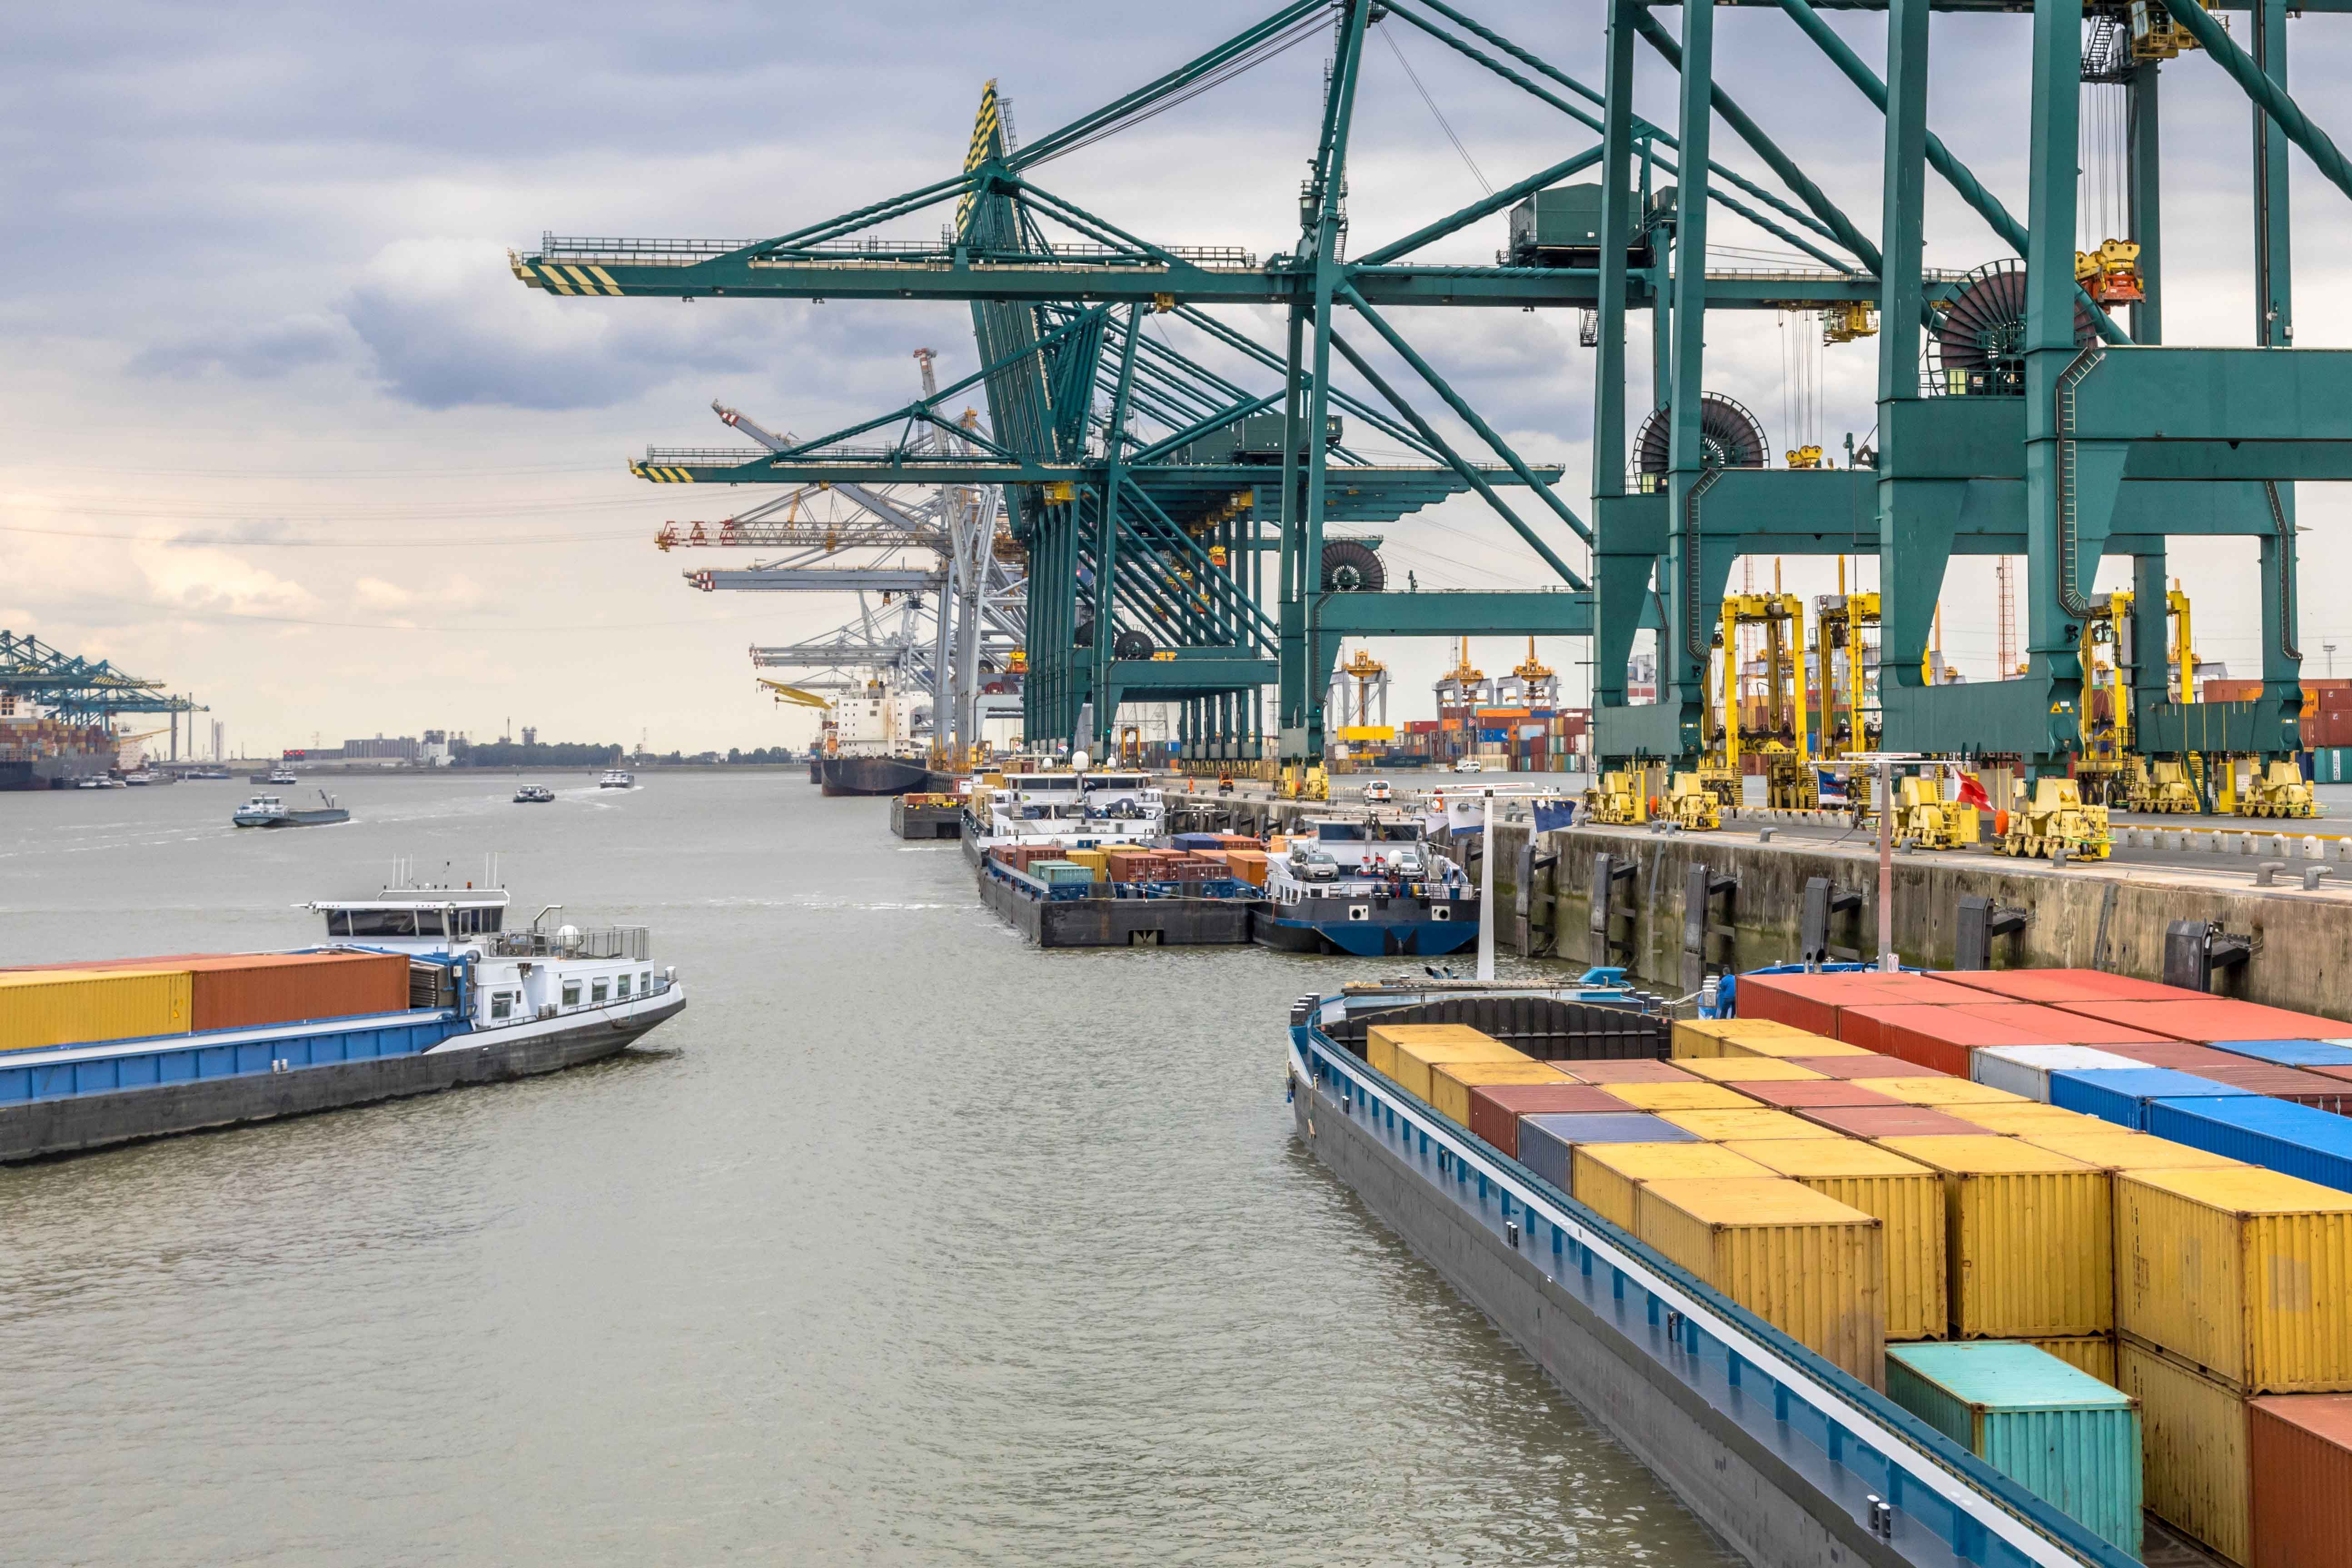 Among Piers: Port of Oakland ends 2020 on high note